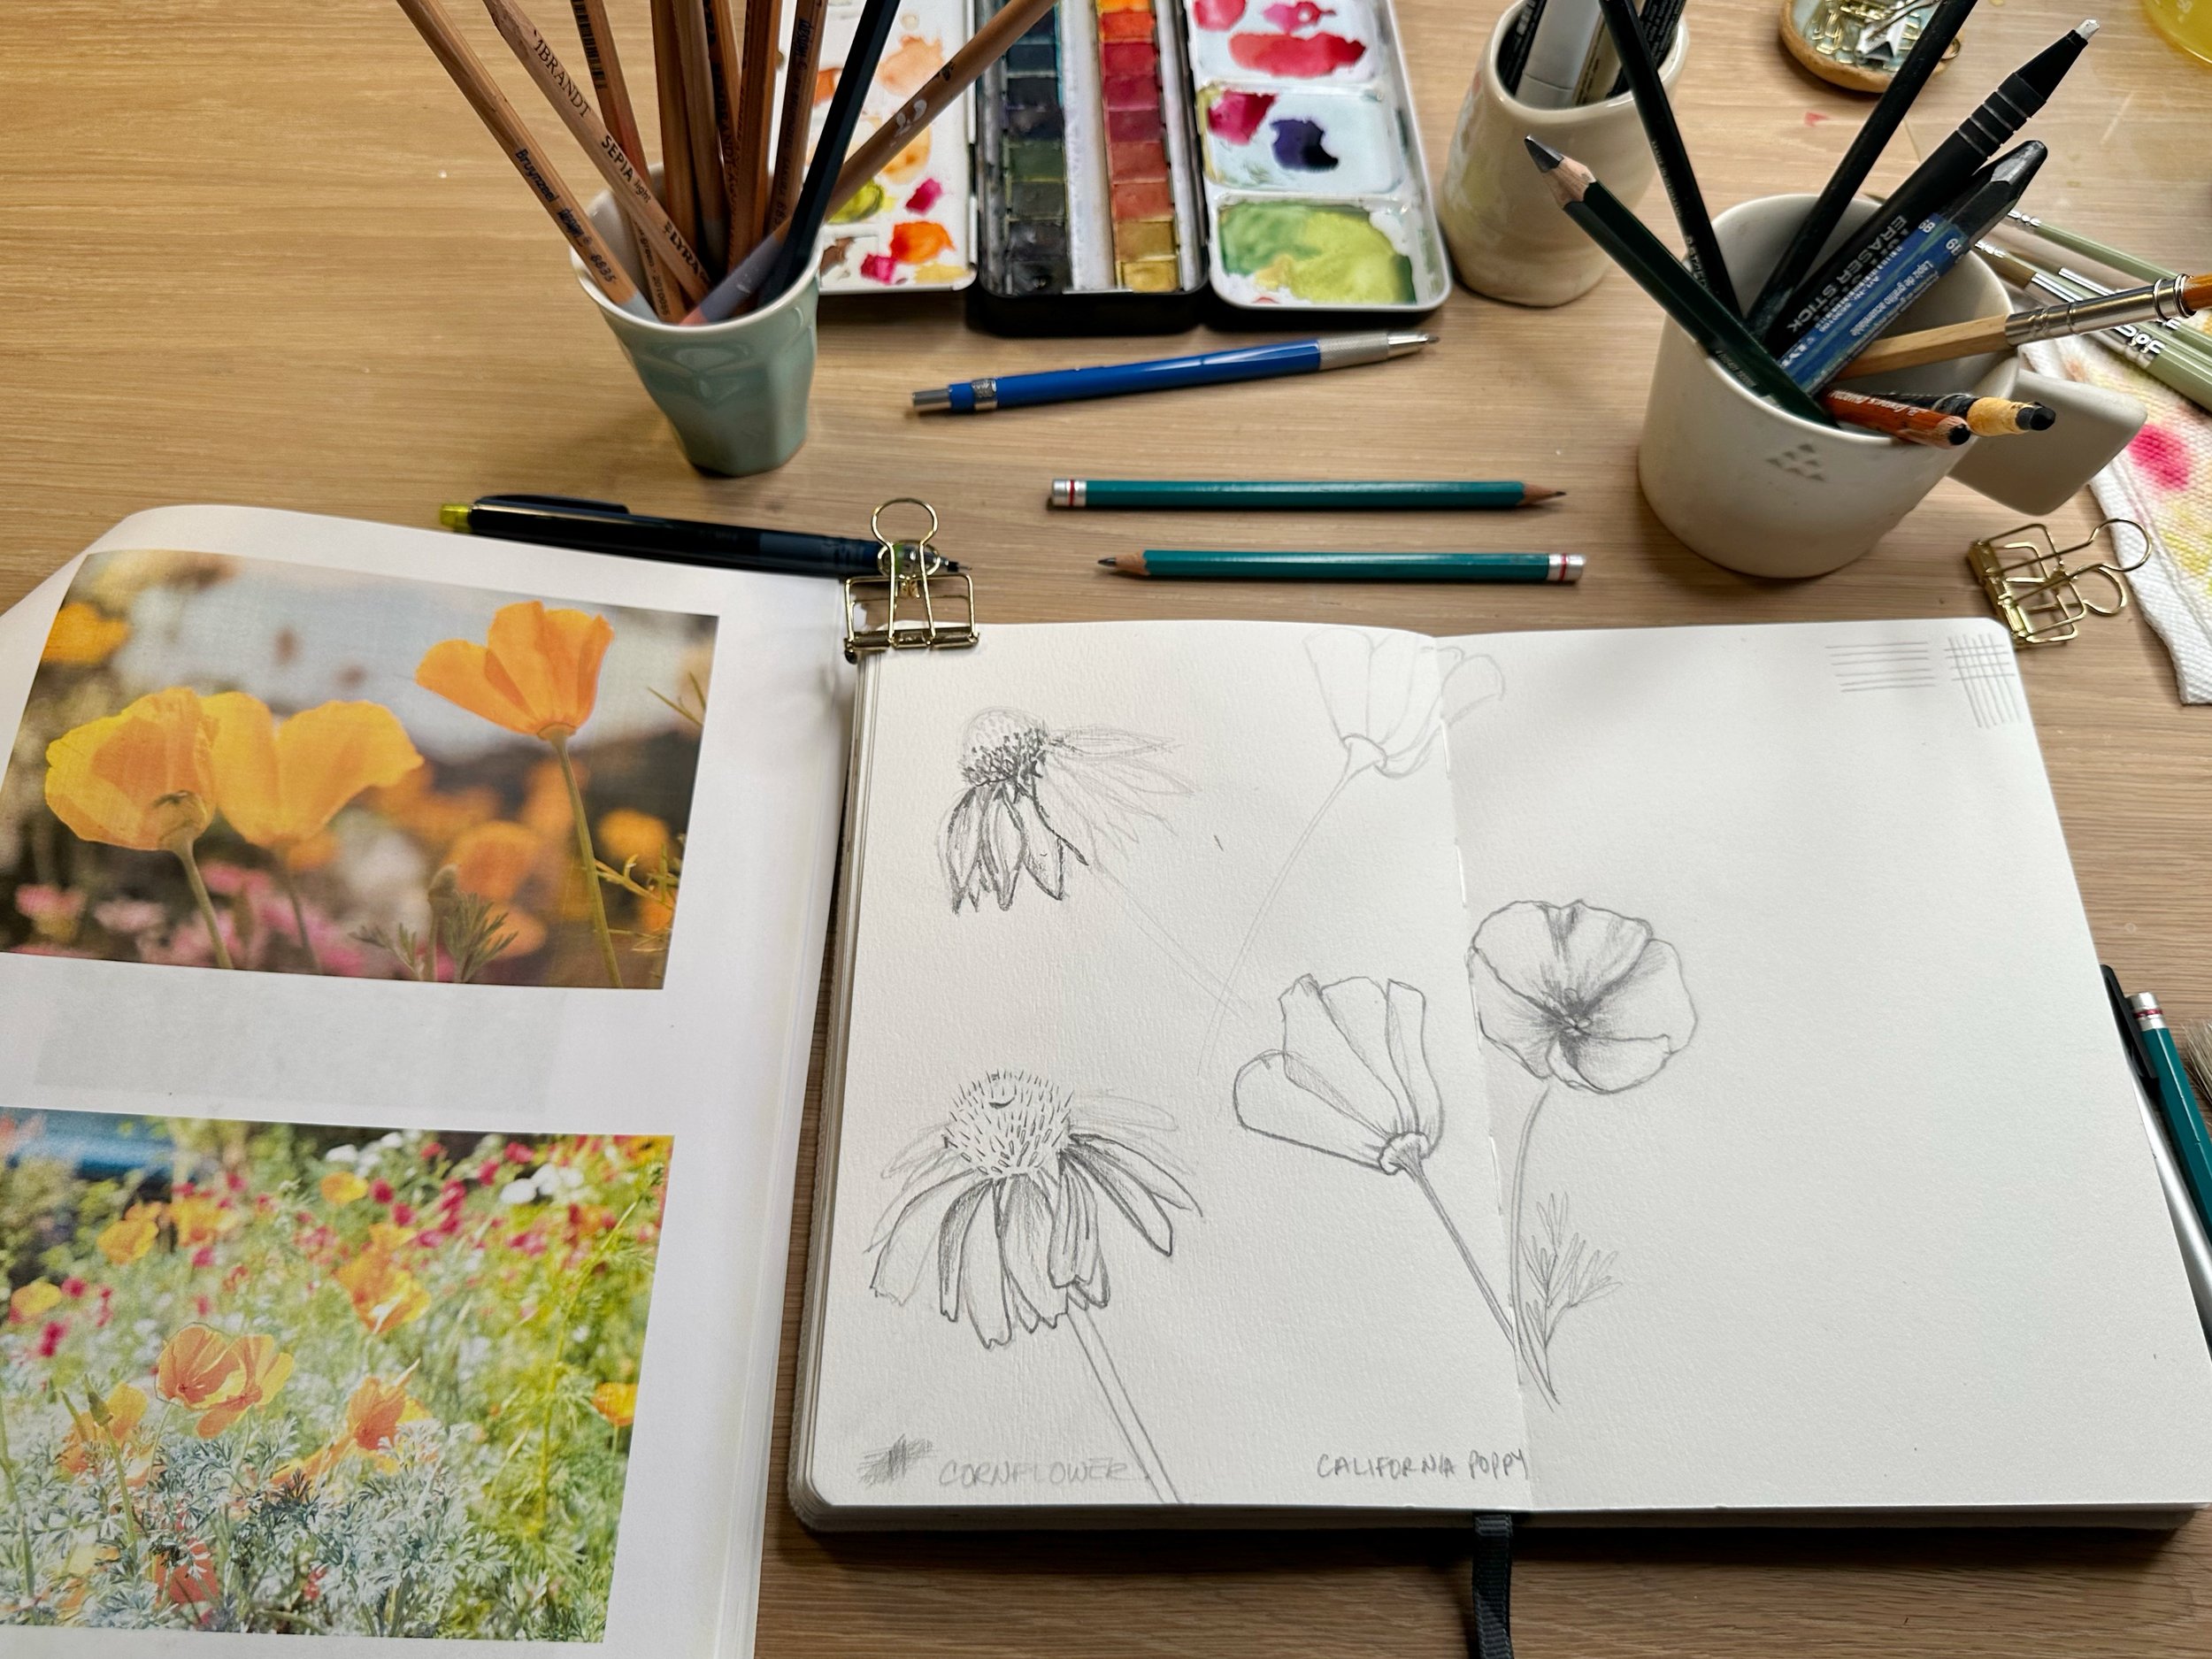 Sketching for Watercolor Painting for Beginners — Nicki Traikos, life i  design